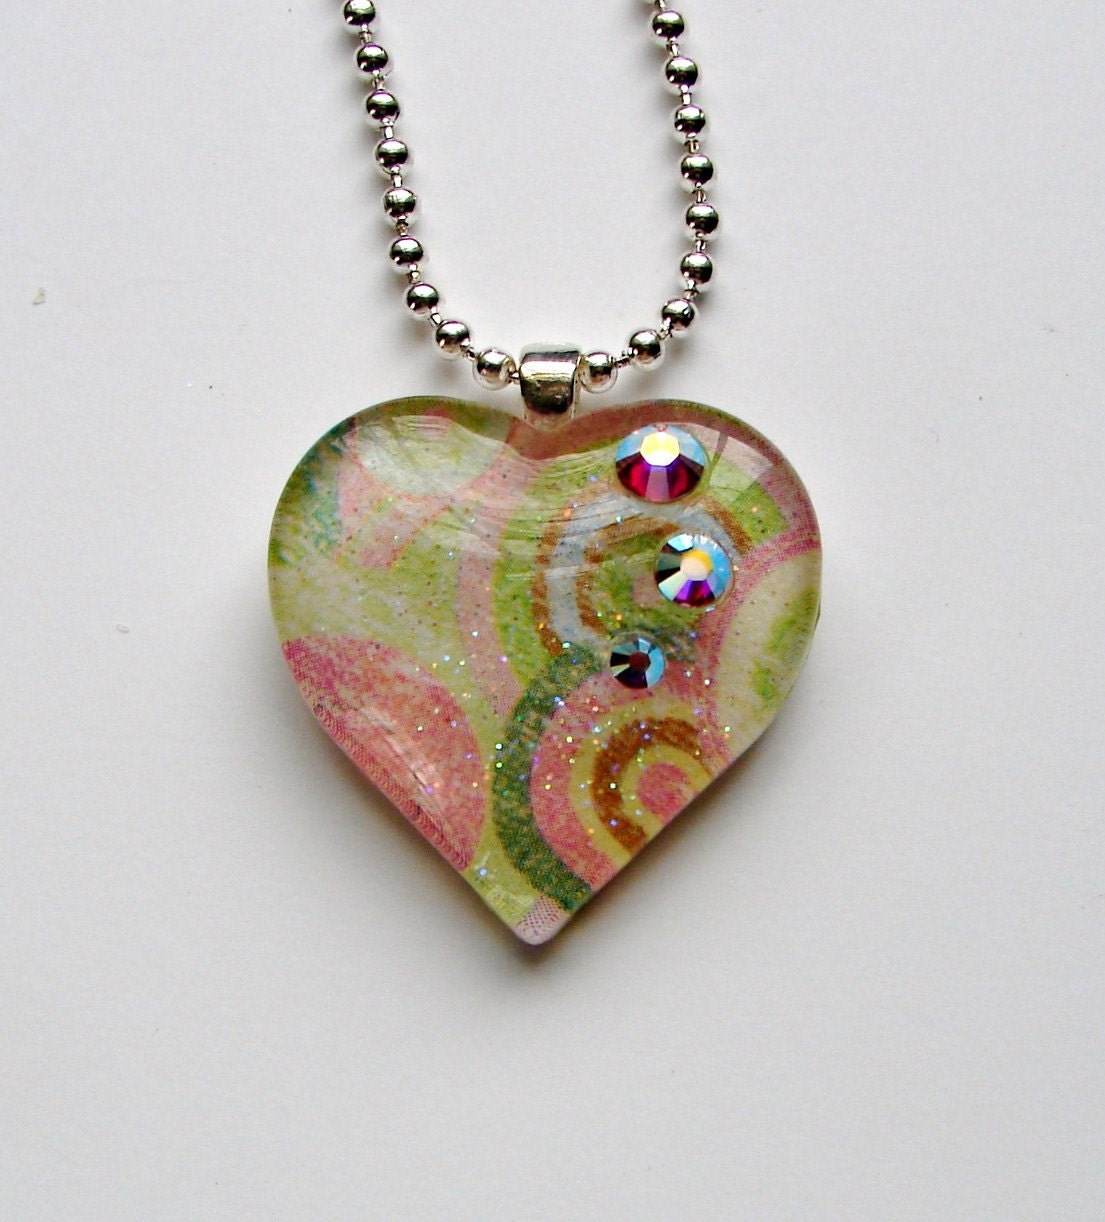 Heart Glass Pendant w/crystals